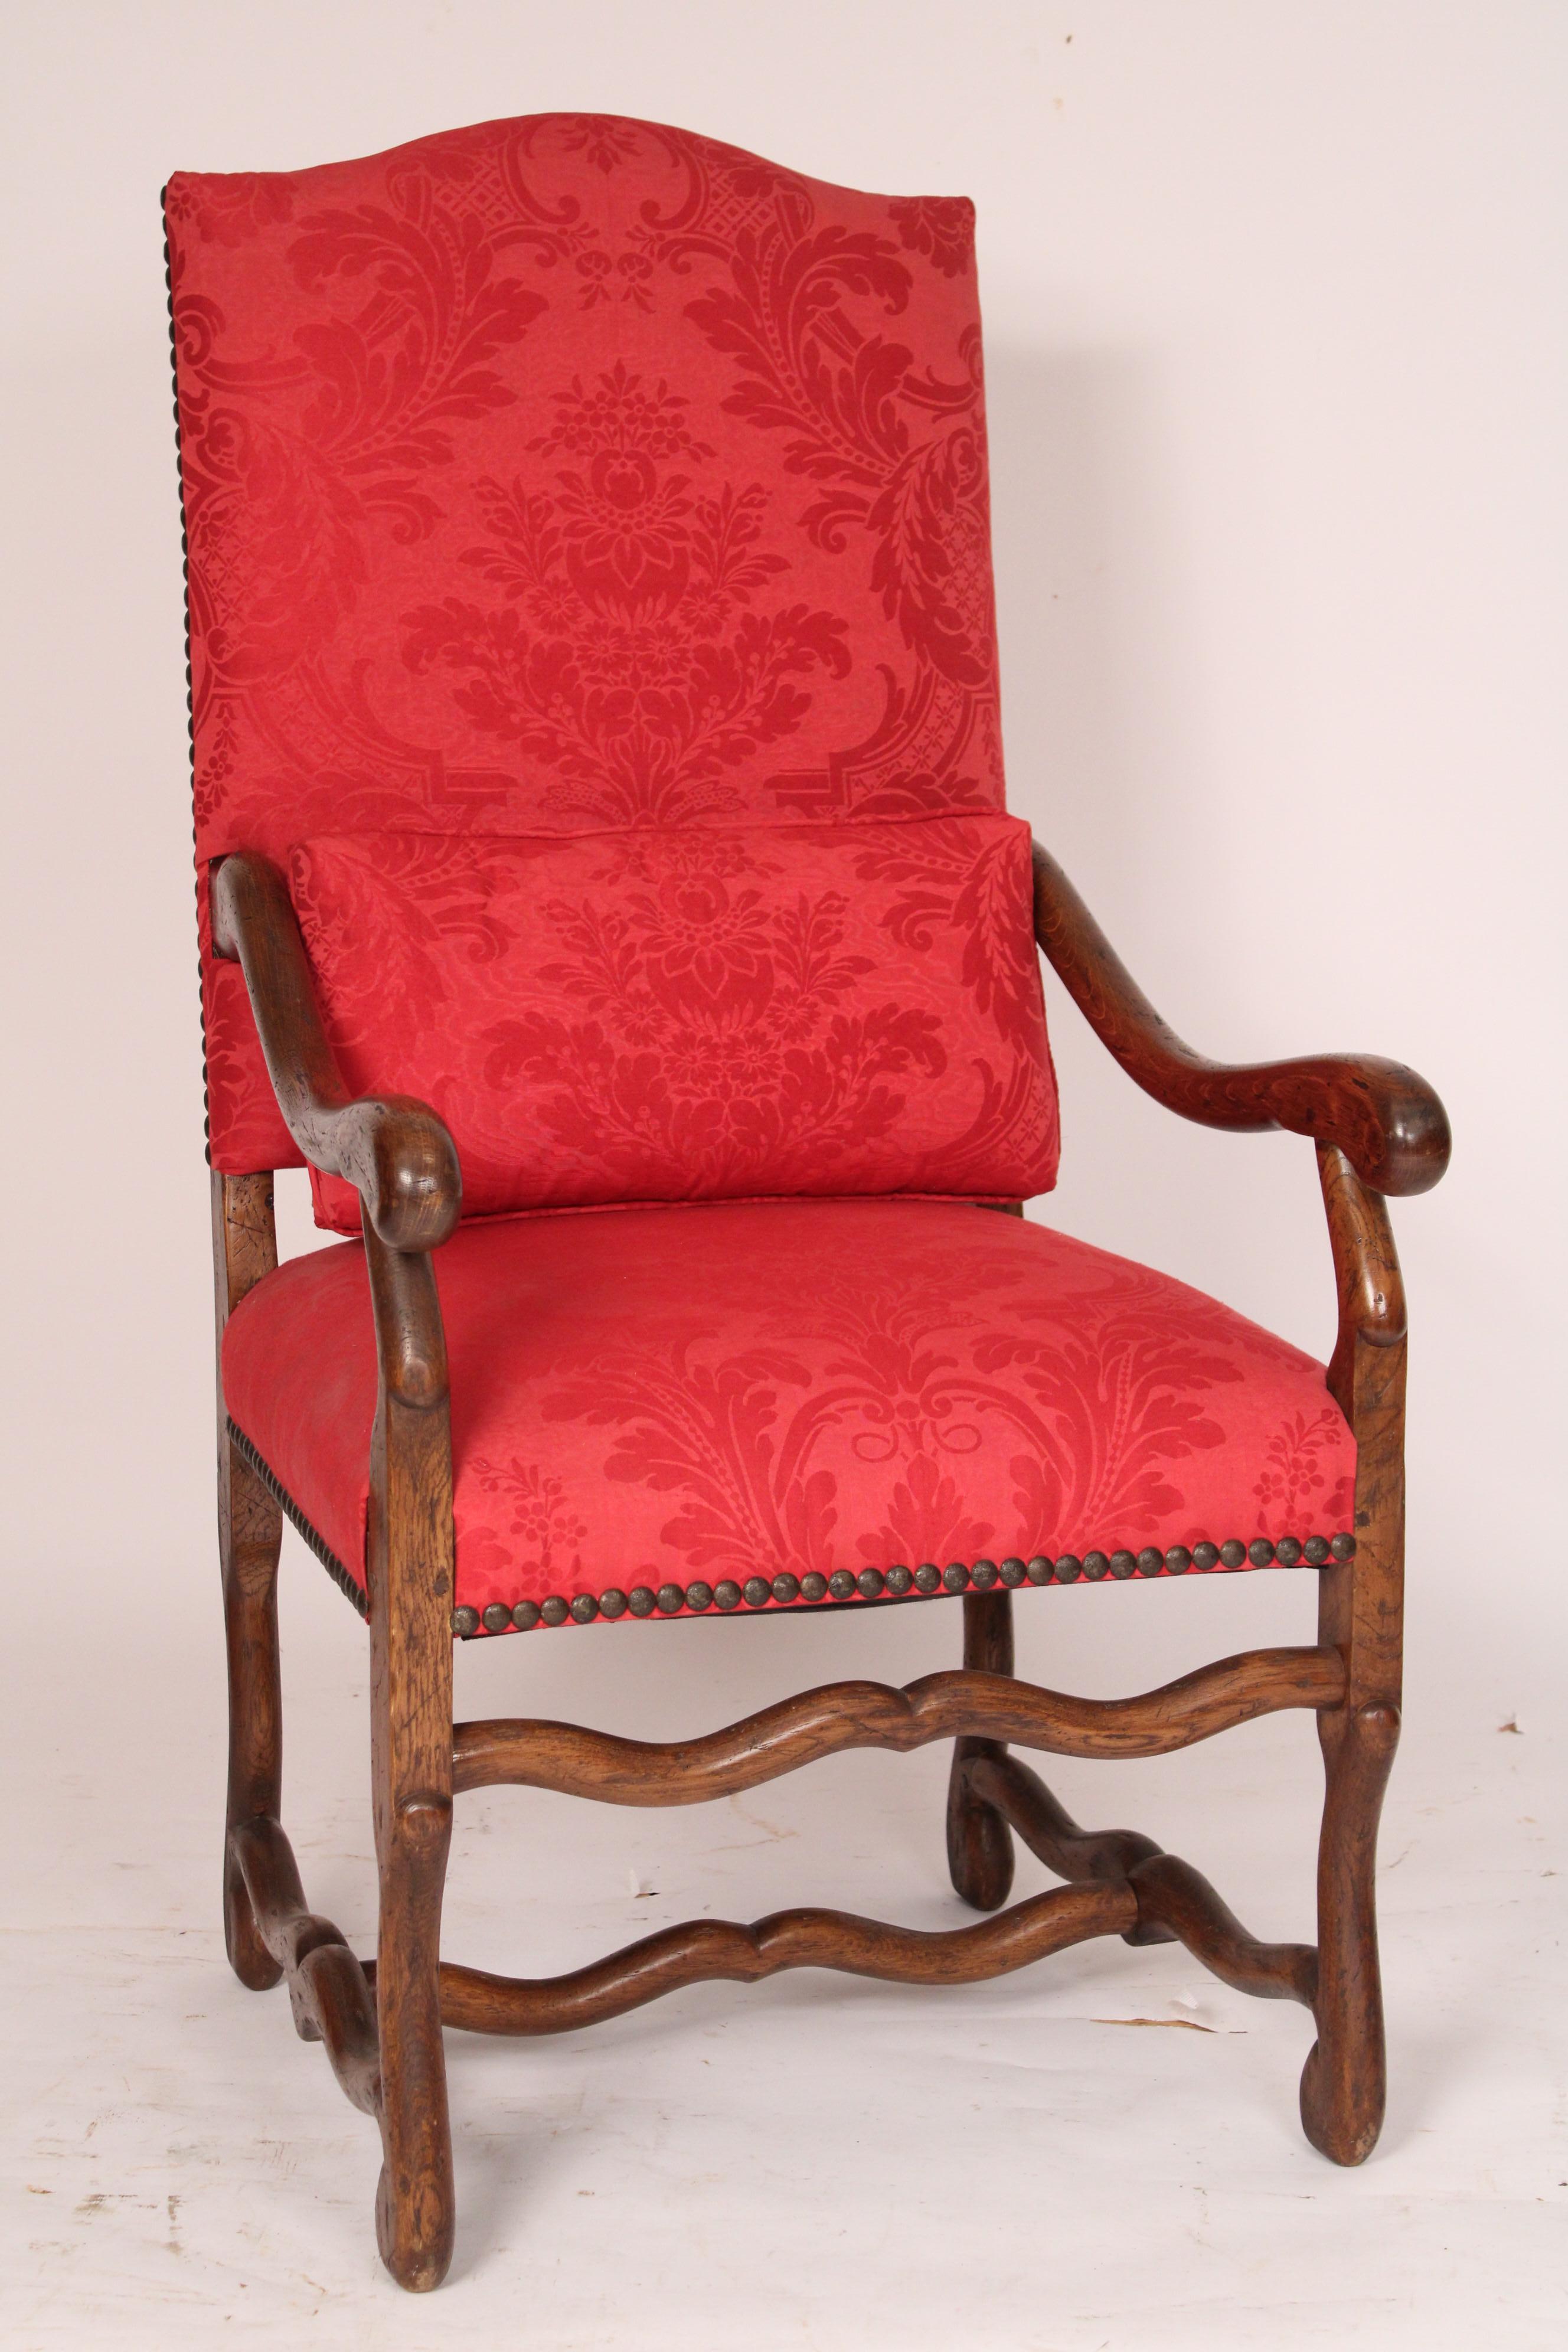 Pair of Louis XIV style oak armchairs, circa 1930's. With cupid's bow crest rail, serpentine shaped arms and os du muton legs. Recently re upholstered in red cotton fabric with brass nail head trim. Mortise, tenon and peg construction. Approximate